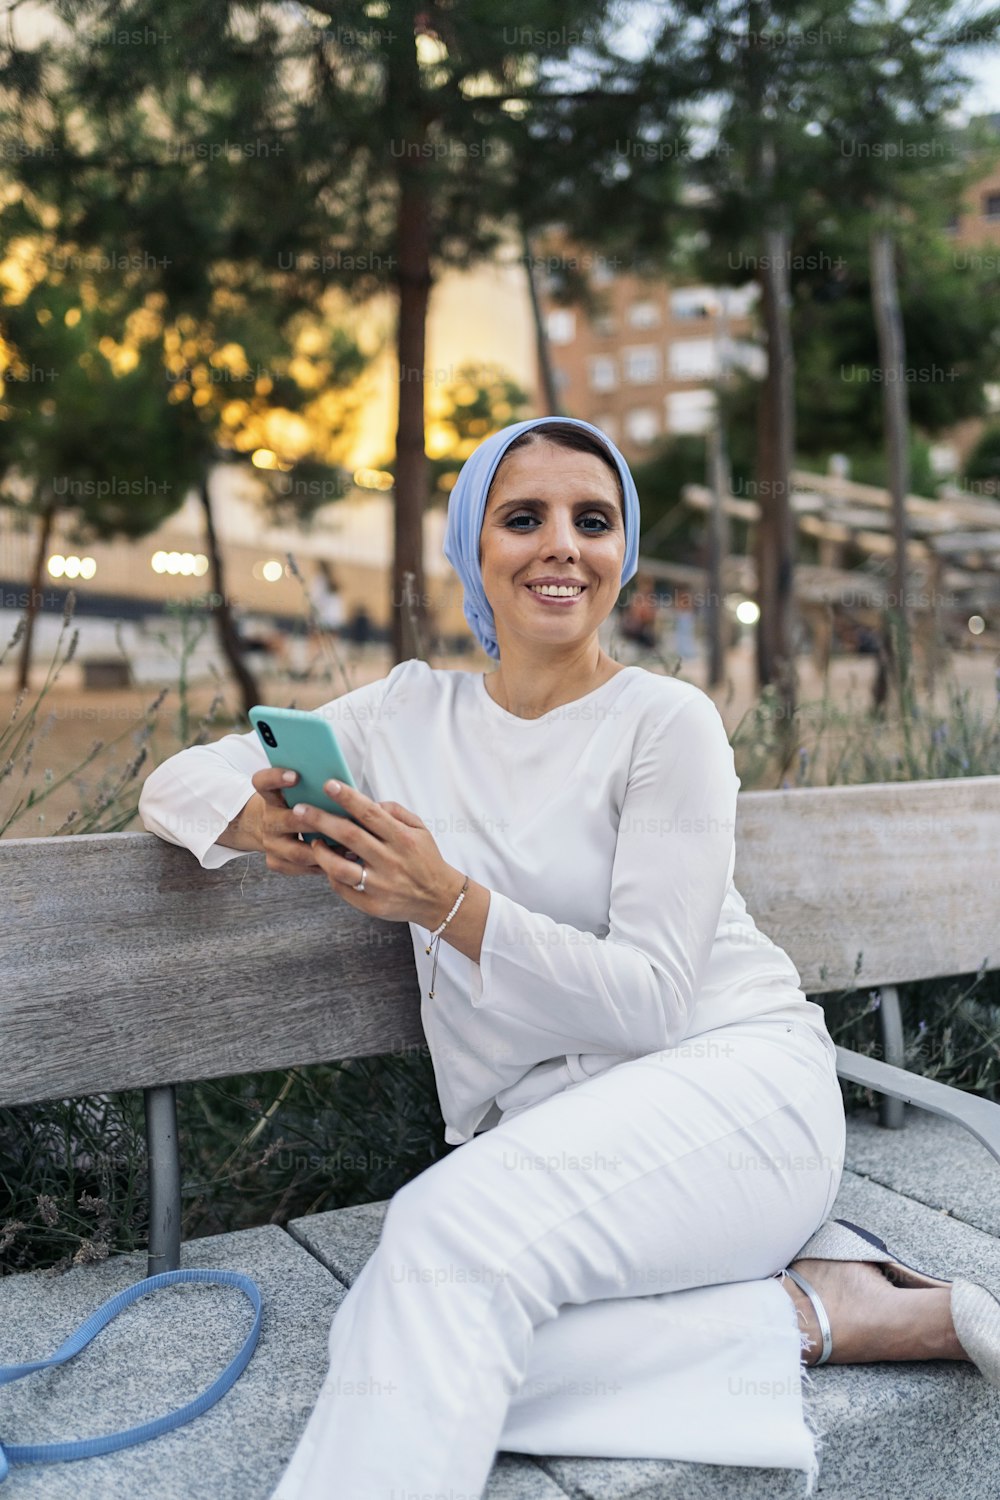 Front view of a muslim woman wearing a light blue headscarf sitting on a bench in the park using her phone.